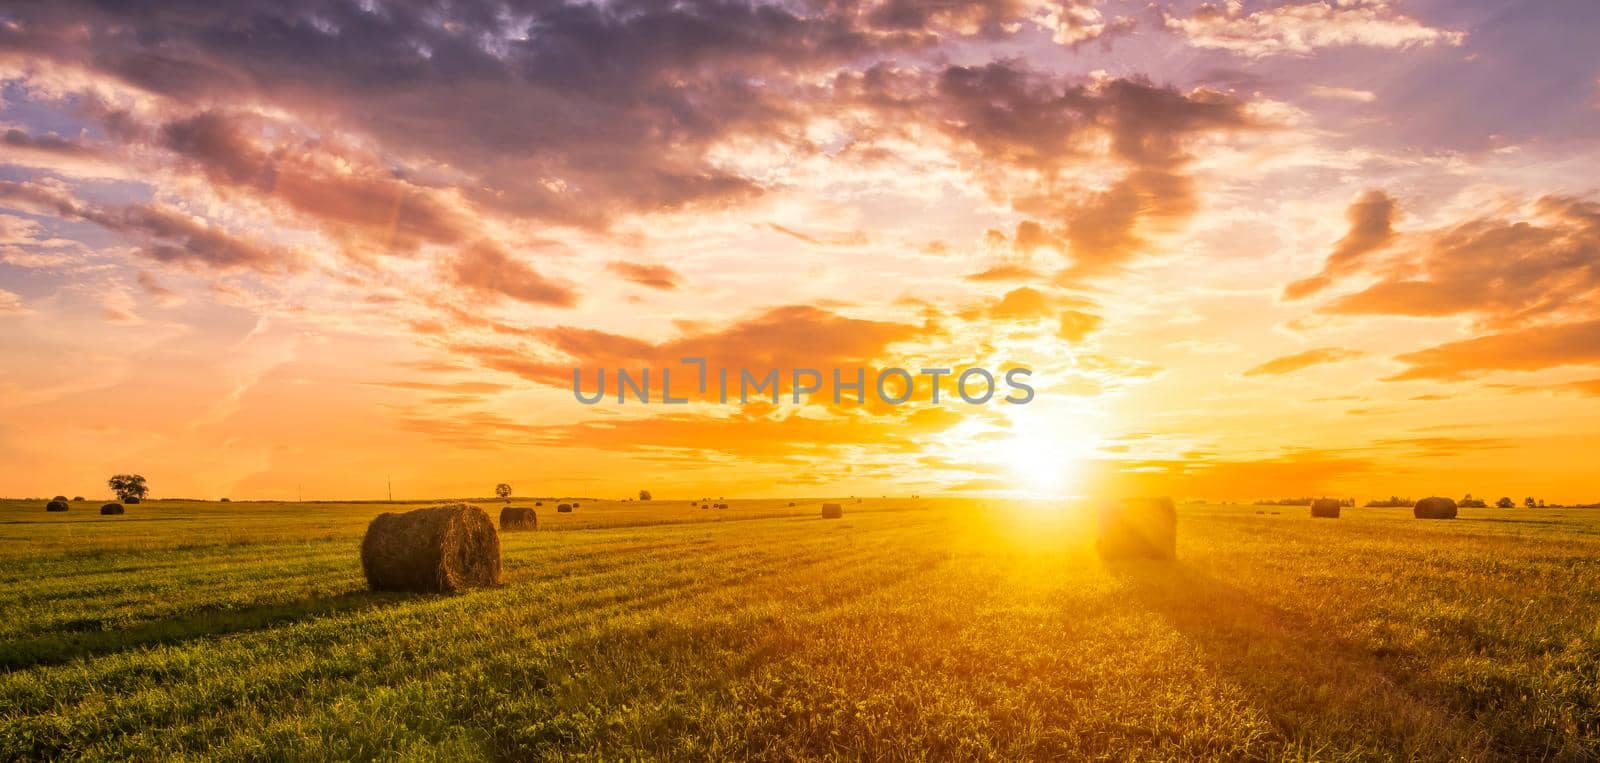 Sunset or sunrise in a field with haystacks on a summer or early autumn evening with a cloudy sky in the background. Procurement of animal feed in agriculture. Landscape.